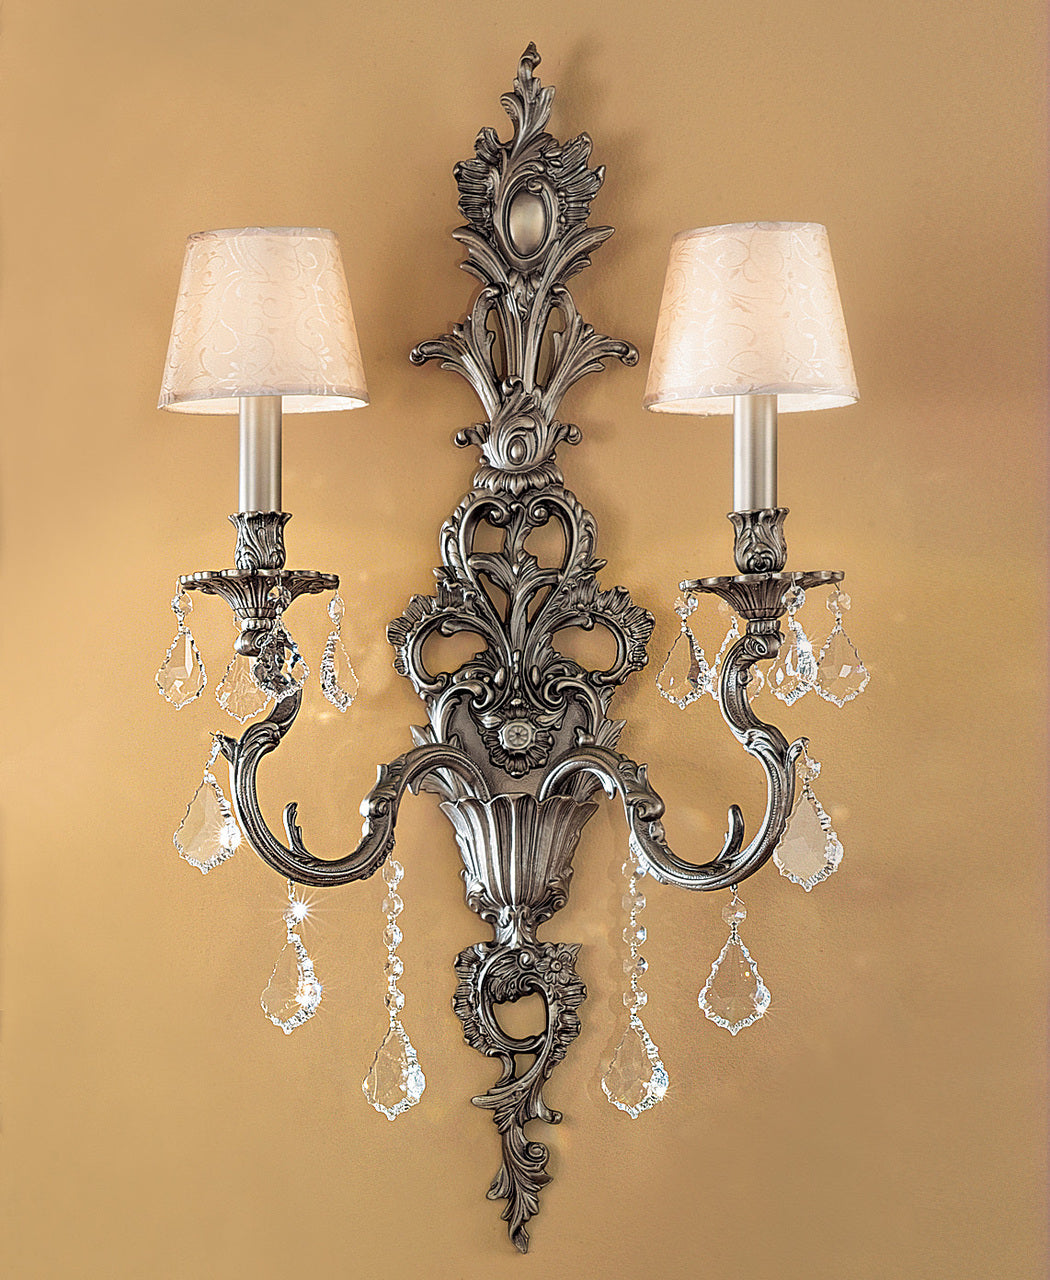 Classic Lighting 57342 FG S Majestic Crystal Wall Sconce in French Gold (Imported from Spain)